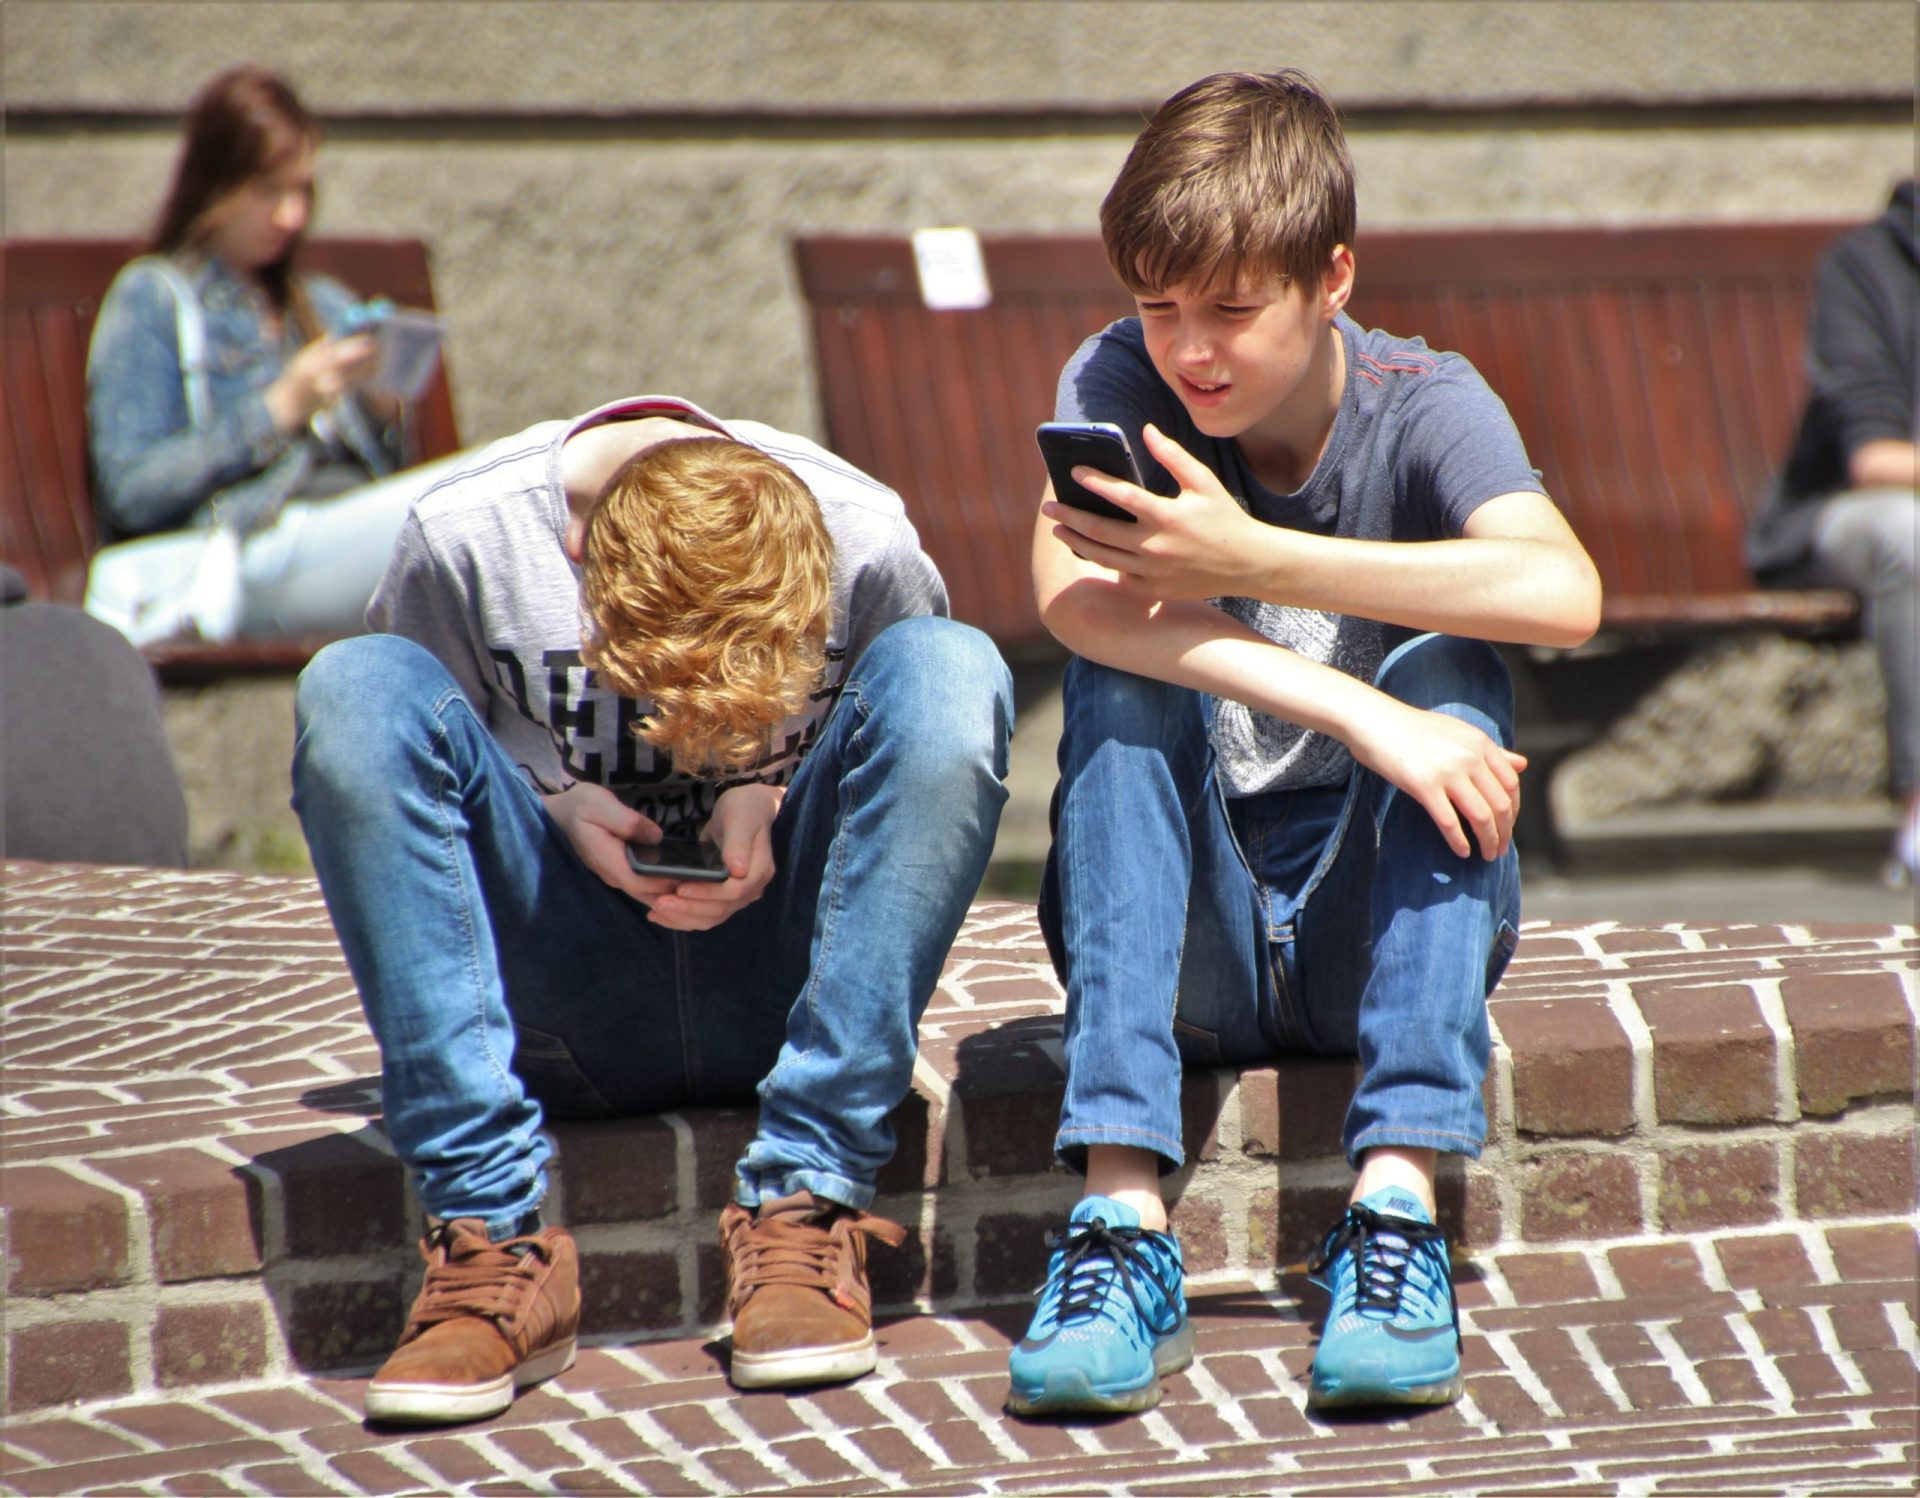 Two teens sitting together on their phones